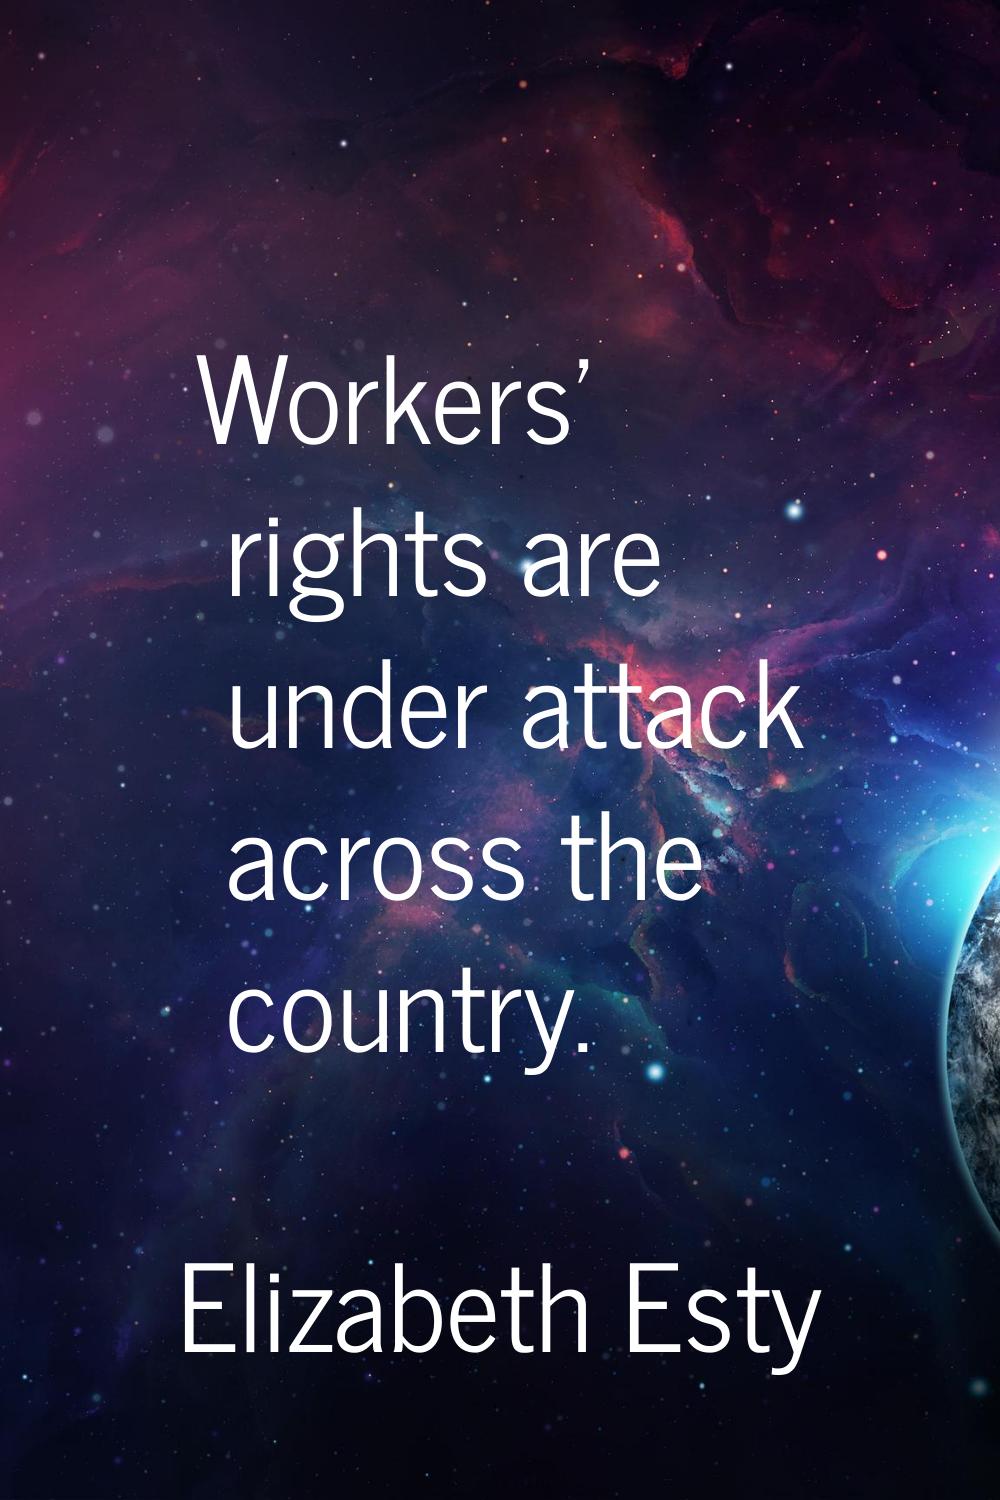 Workers' rights are under attack across the country.